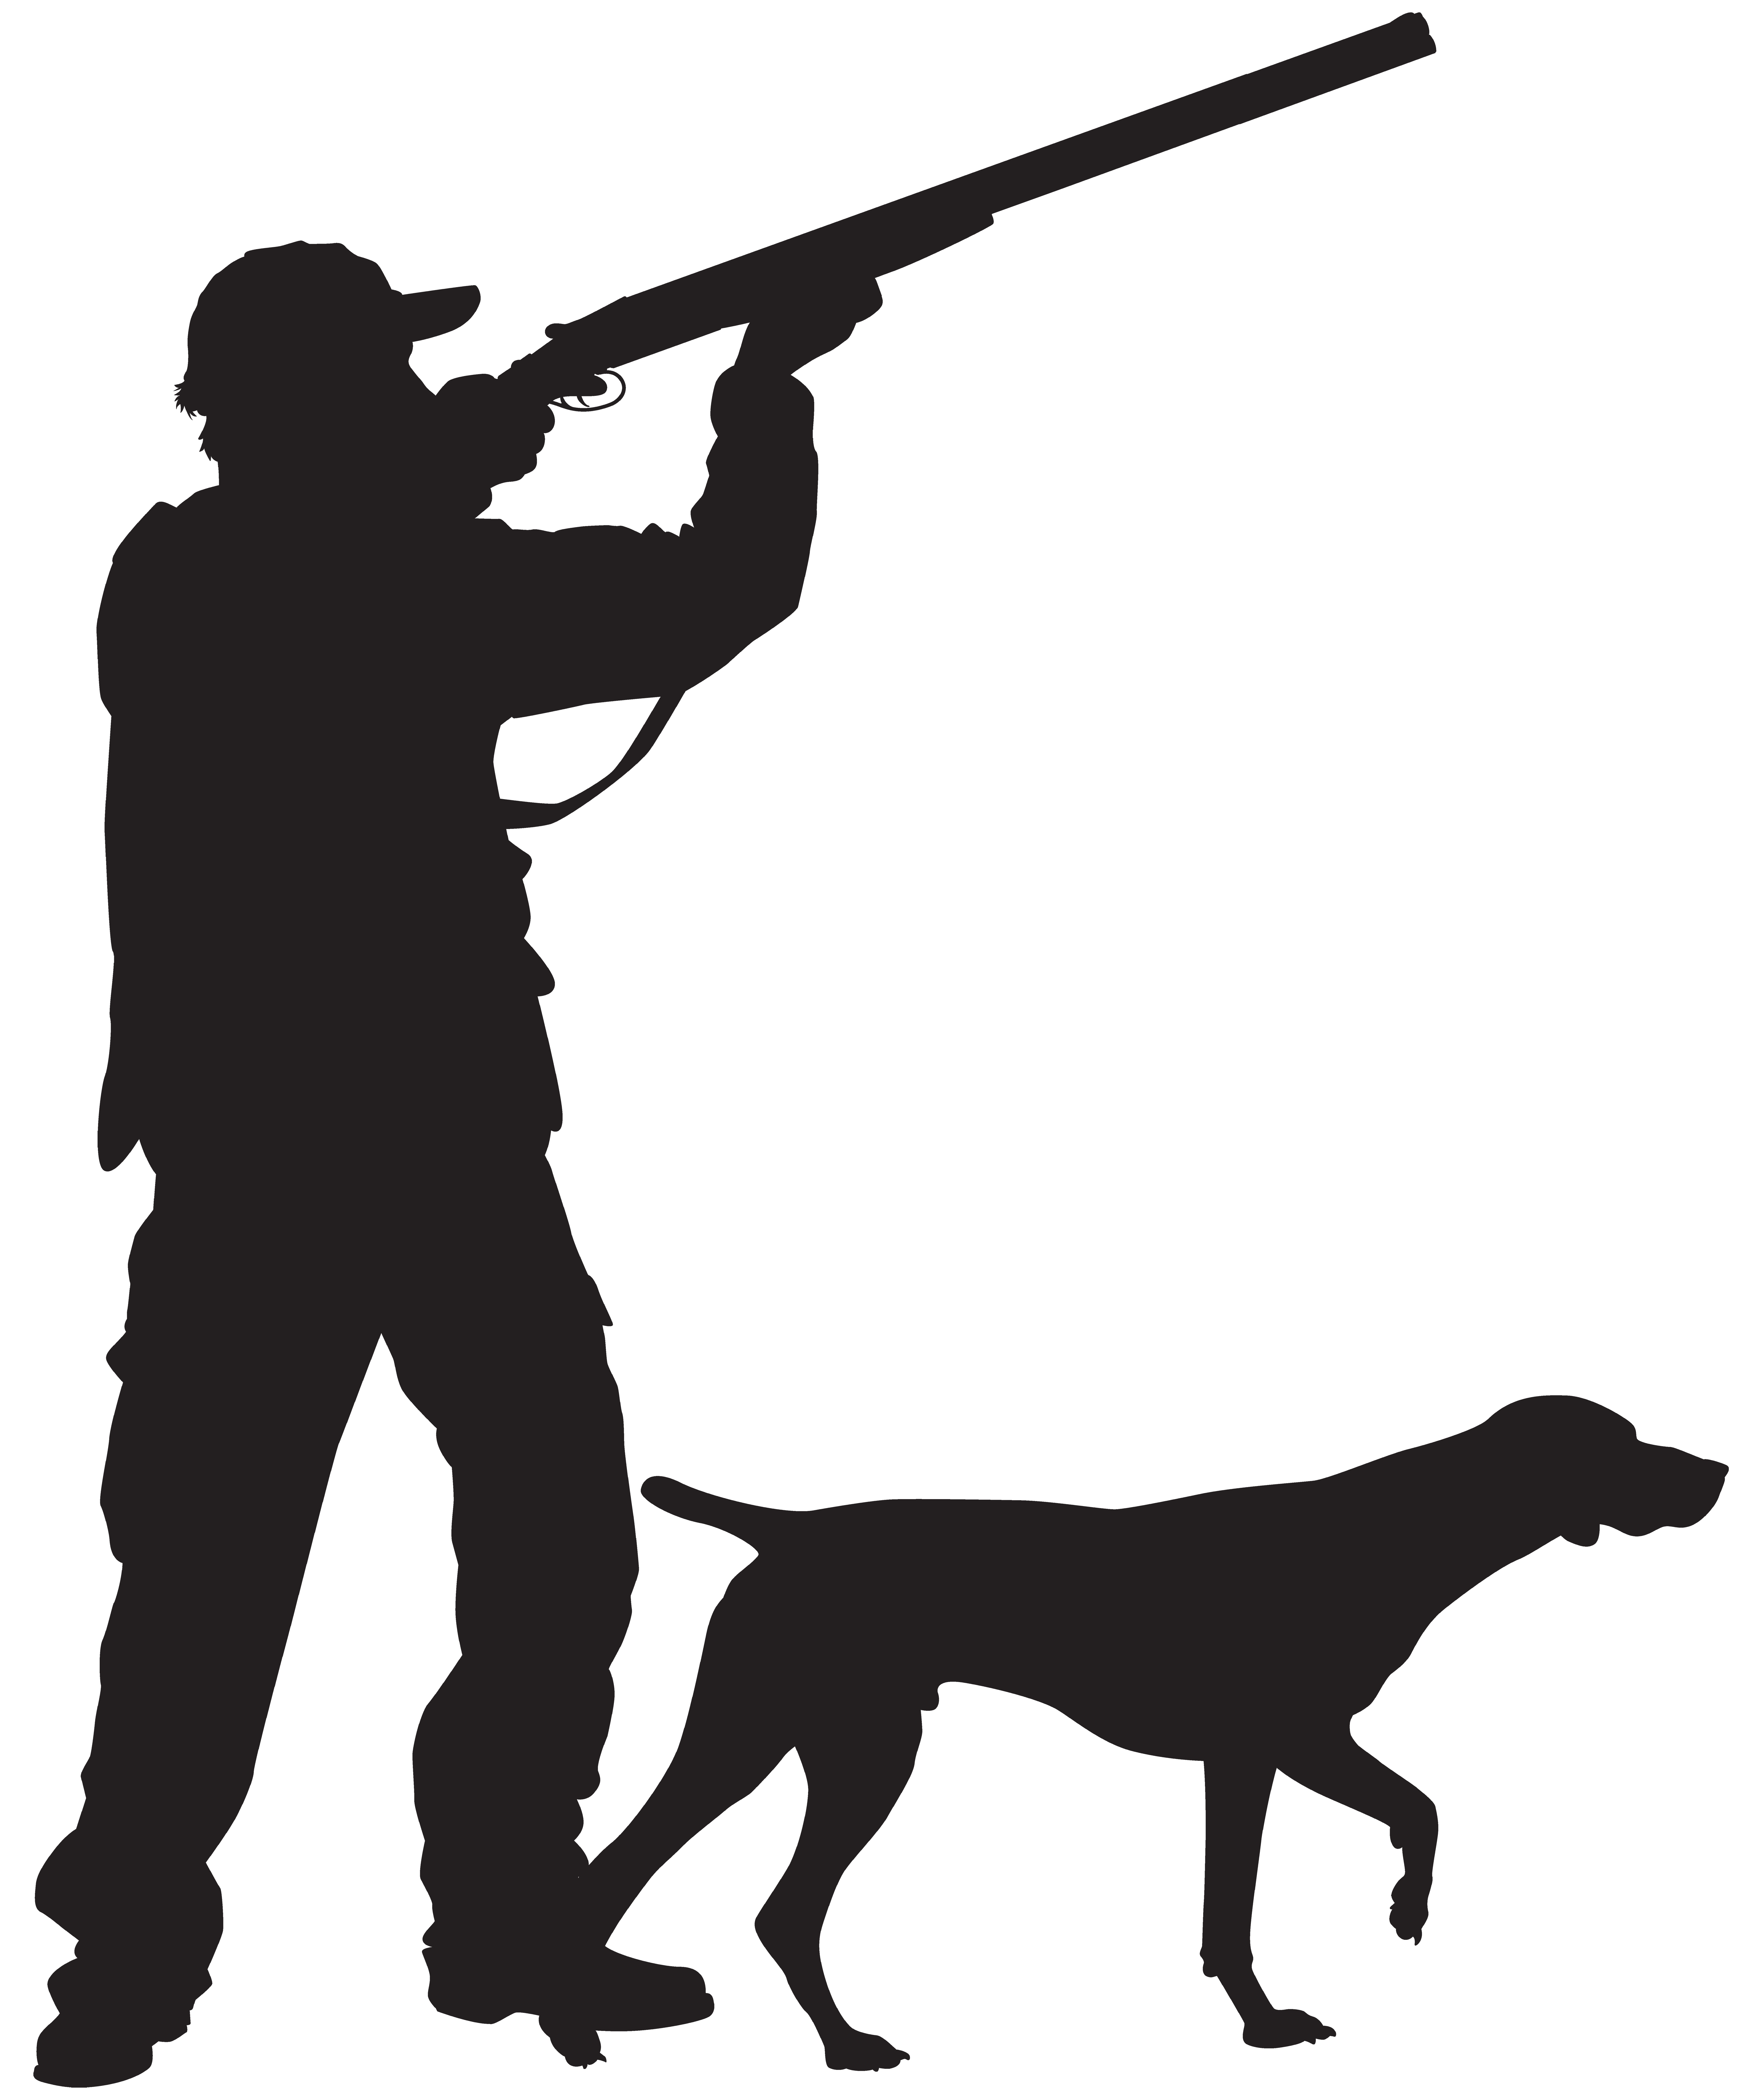 Hunter with Dog Silhouette PNG Clip Art Image.